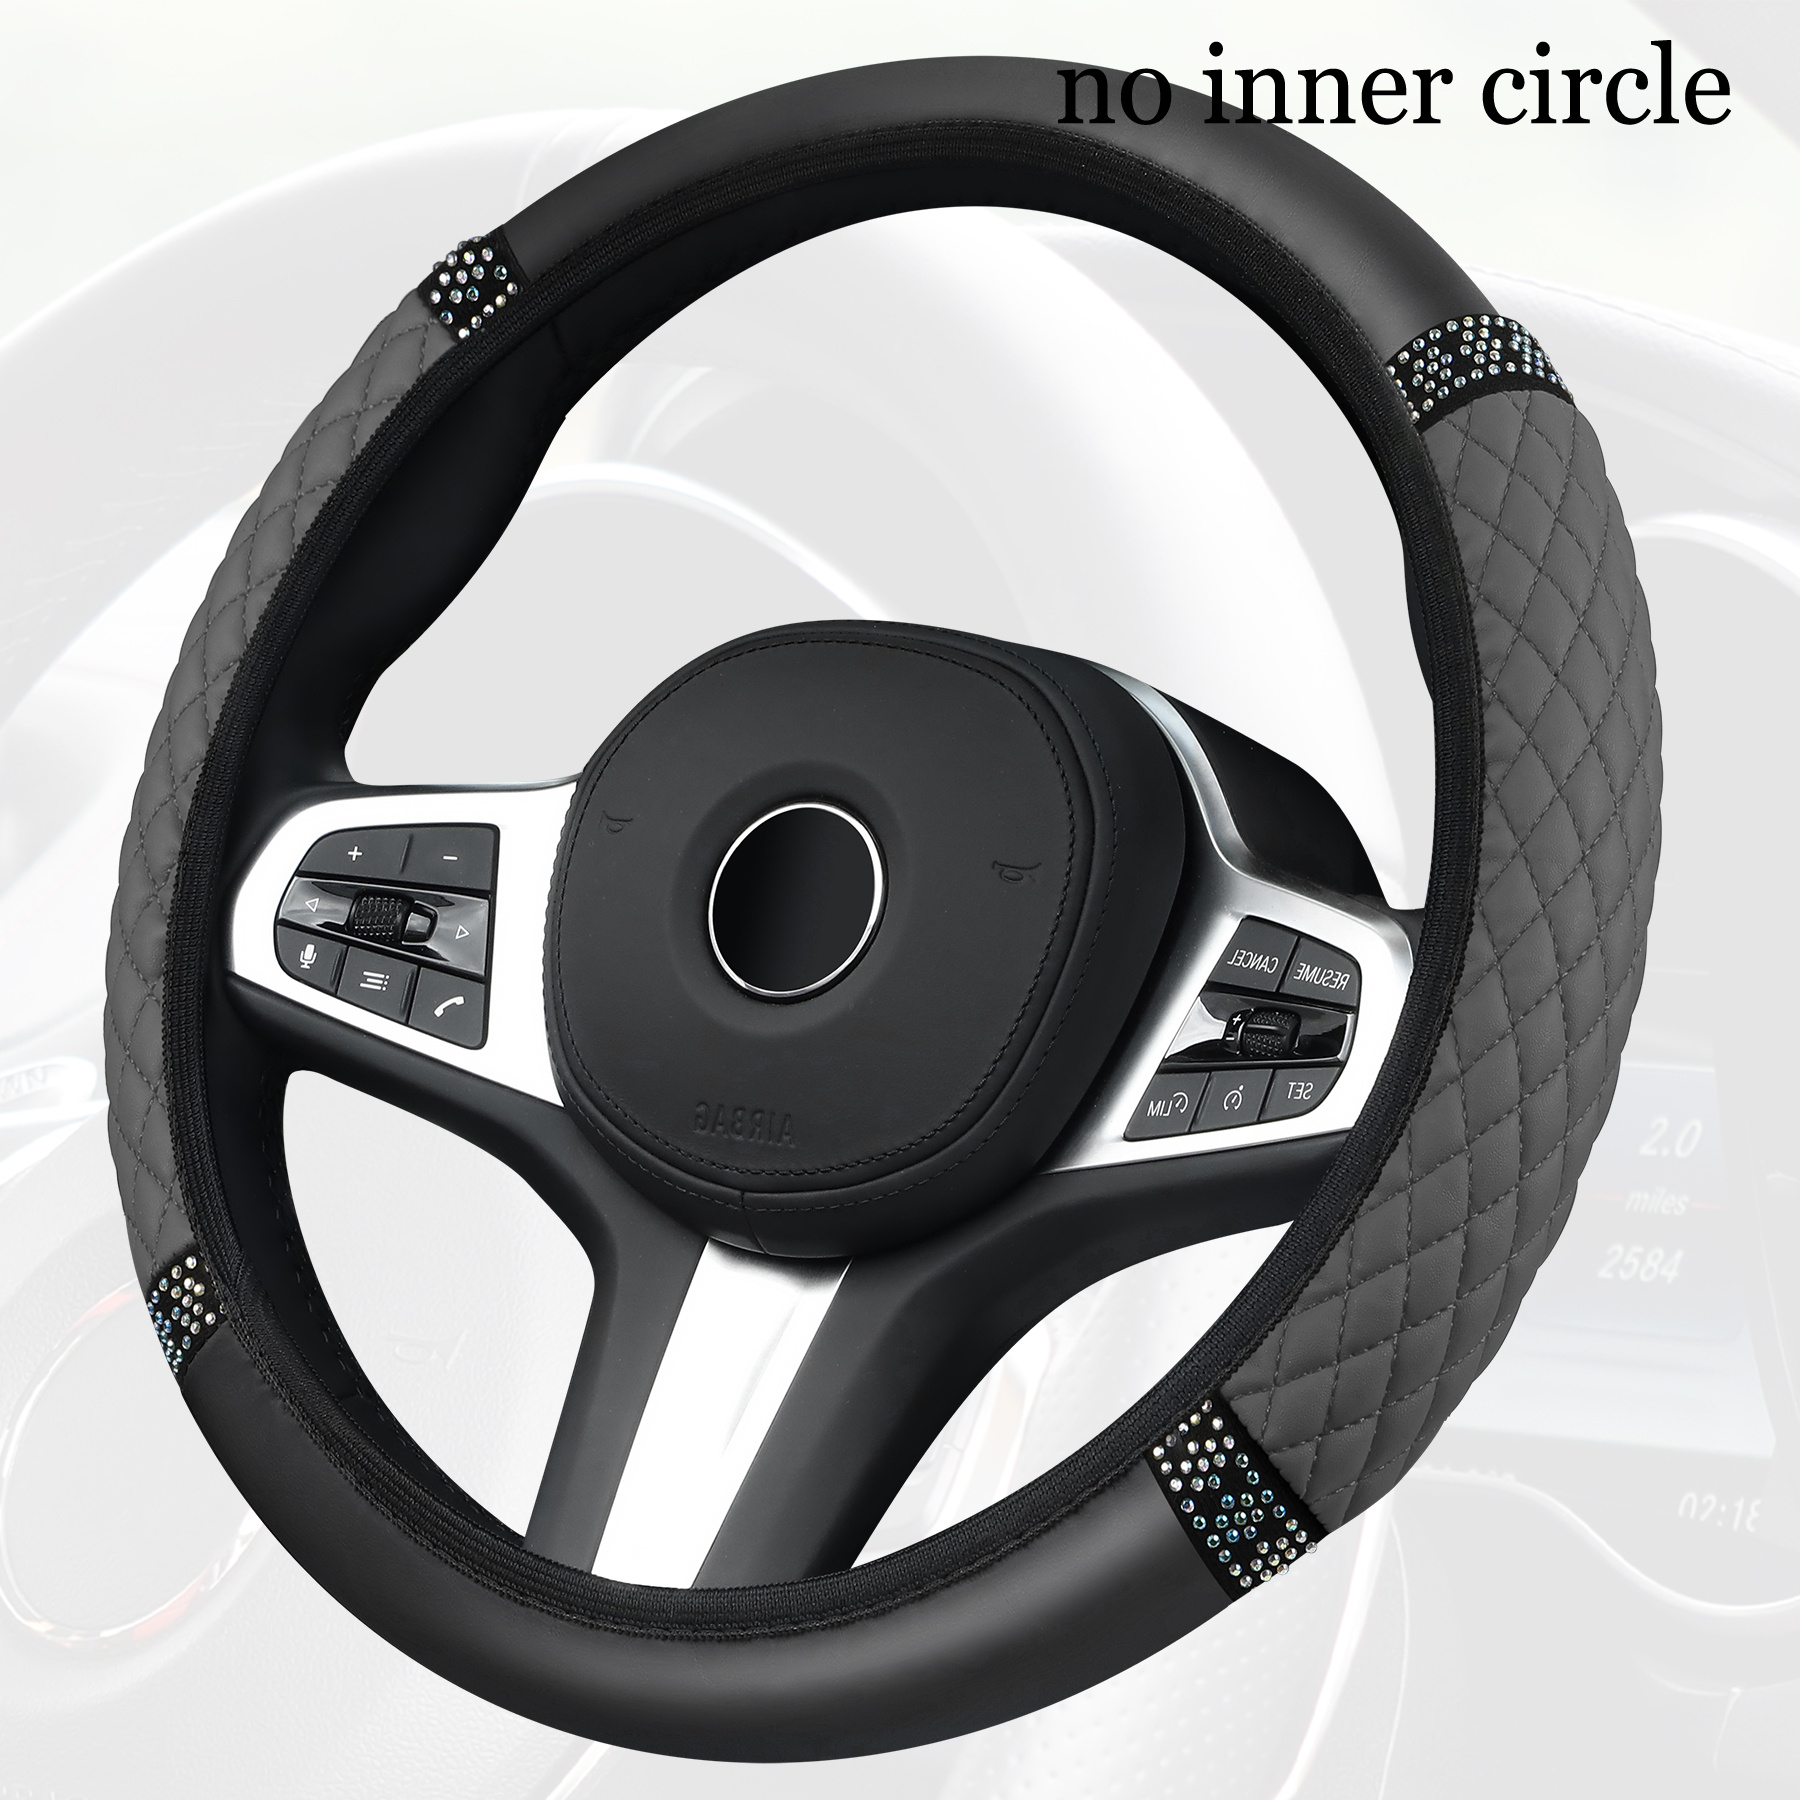 Universal 13-18 Inch PU Leather steering wheel cover 